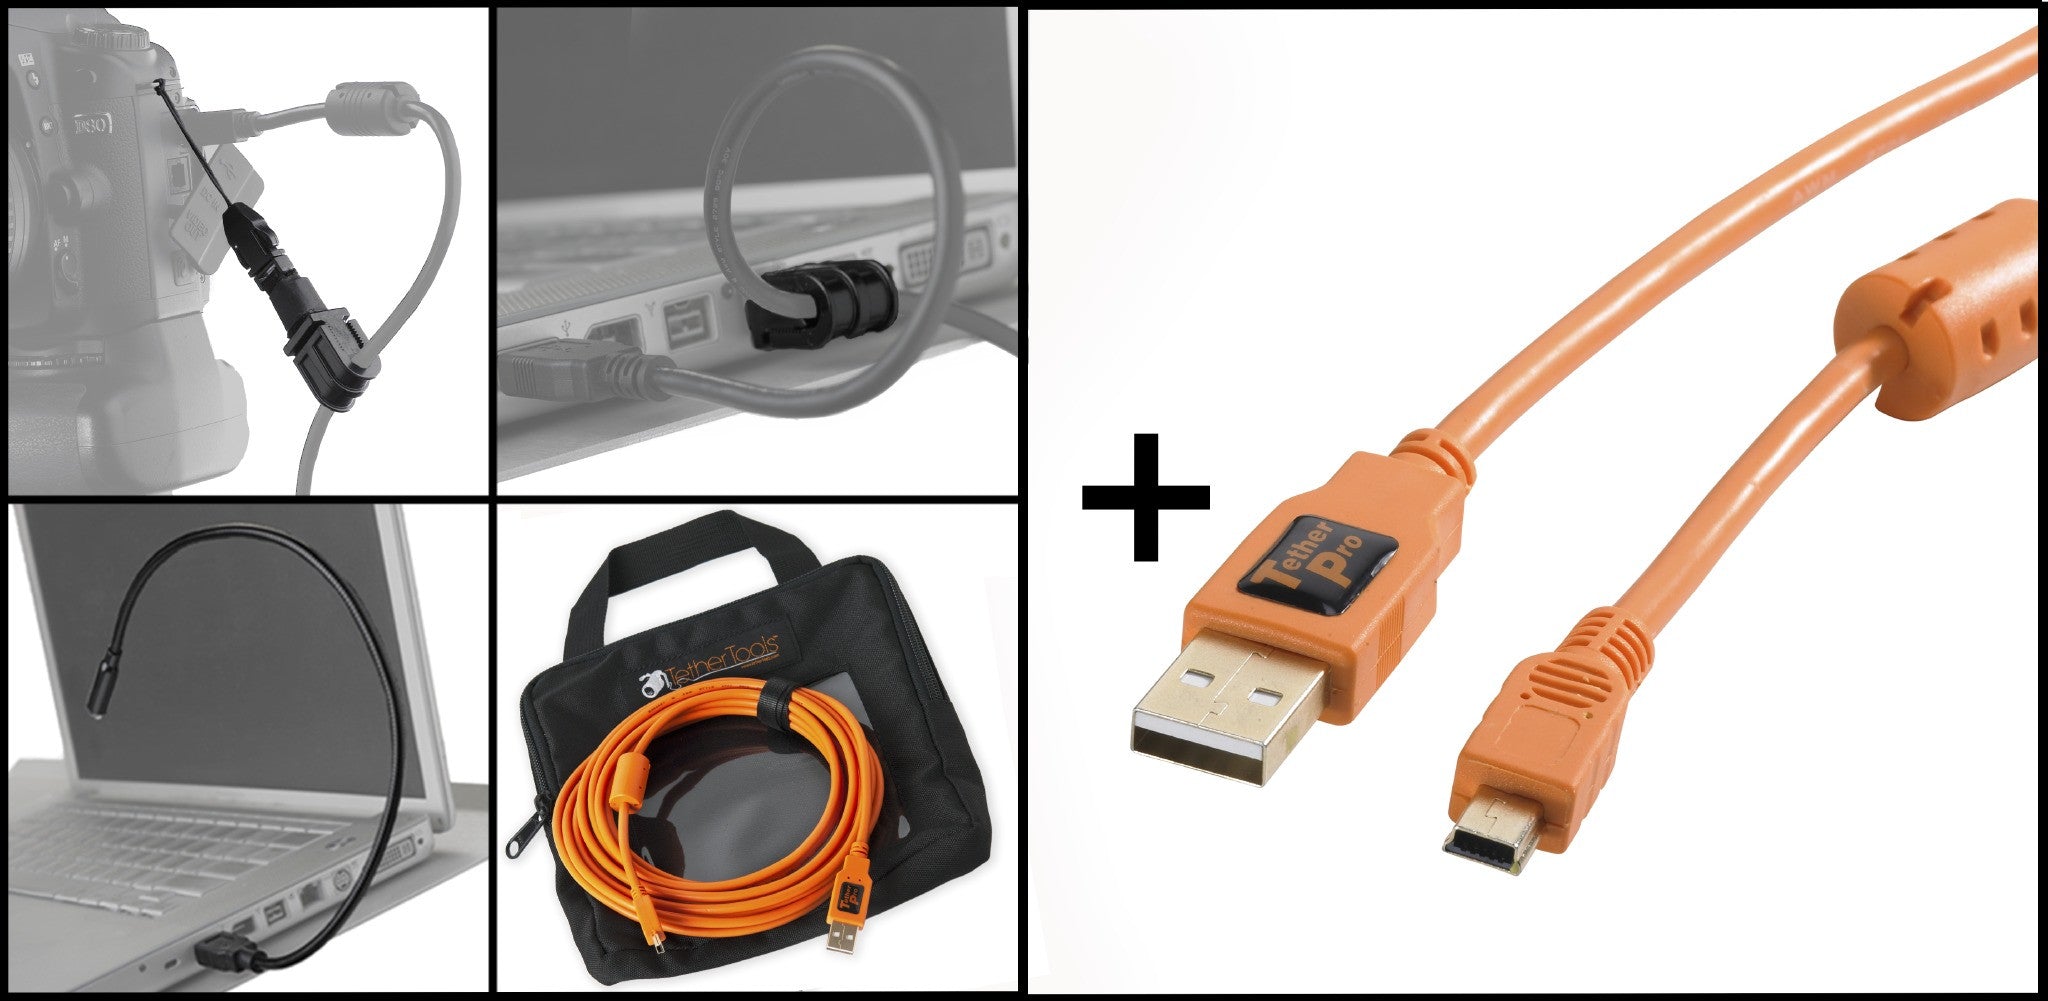 Tether Tools Starter Tethering Kit w/ USB 2.0 Mini-B 5 Pin Cable 15' ORG, camera tethering, Tether Tools - Pictureline  - 2